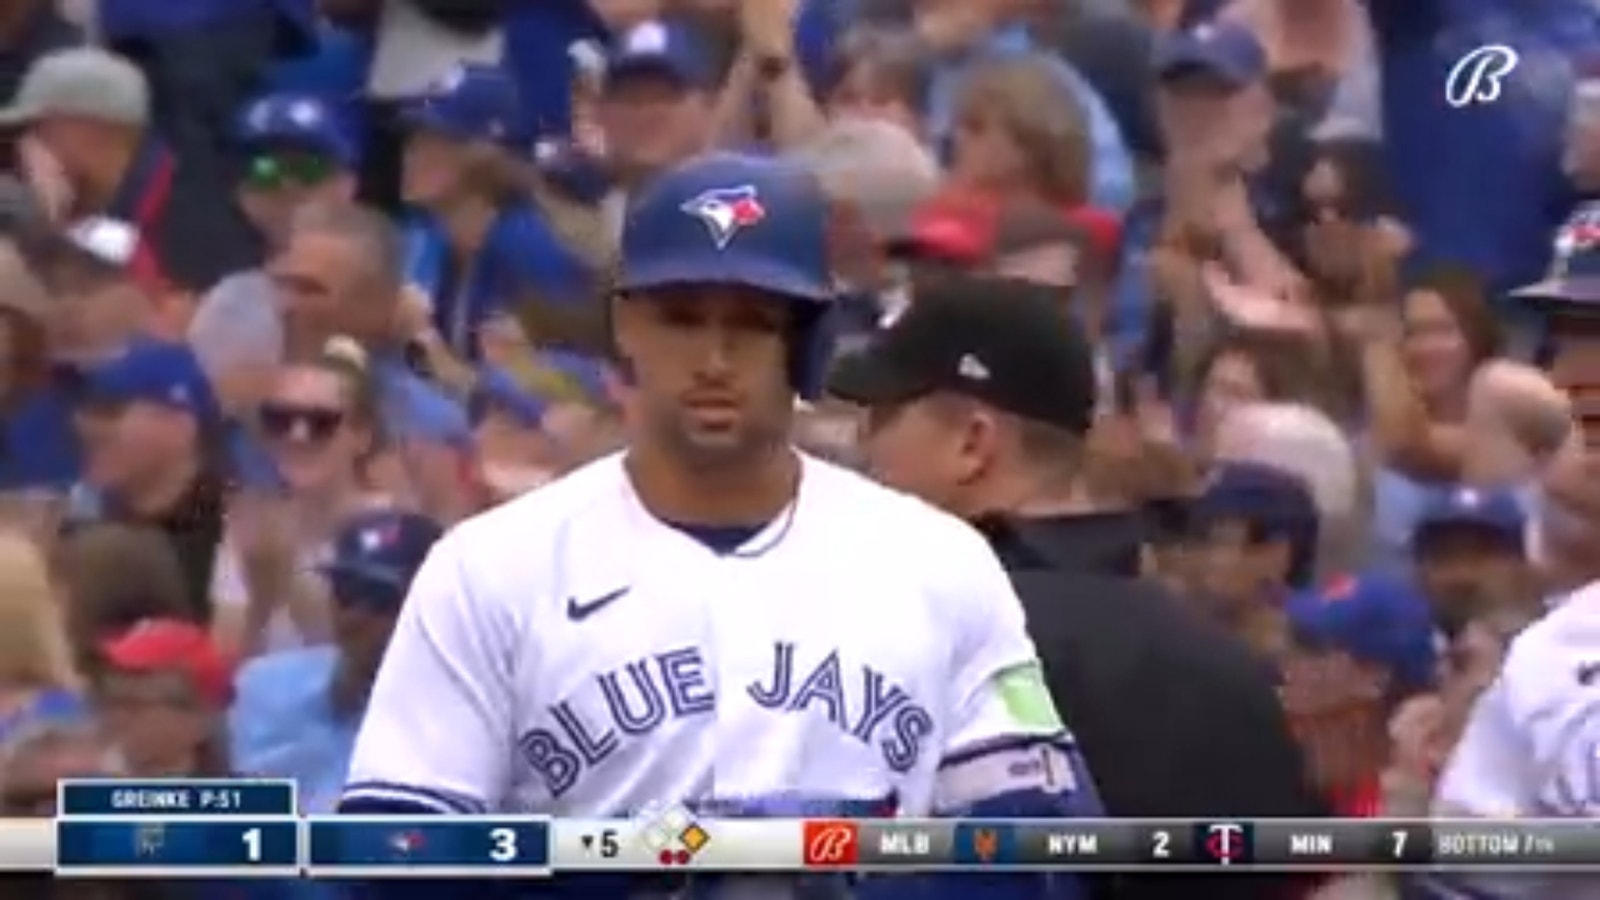 Highlights from the Blue Jays' 5-1 win over the Royals